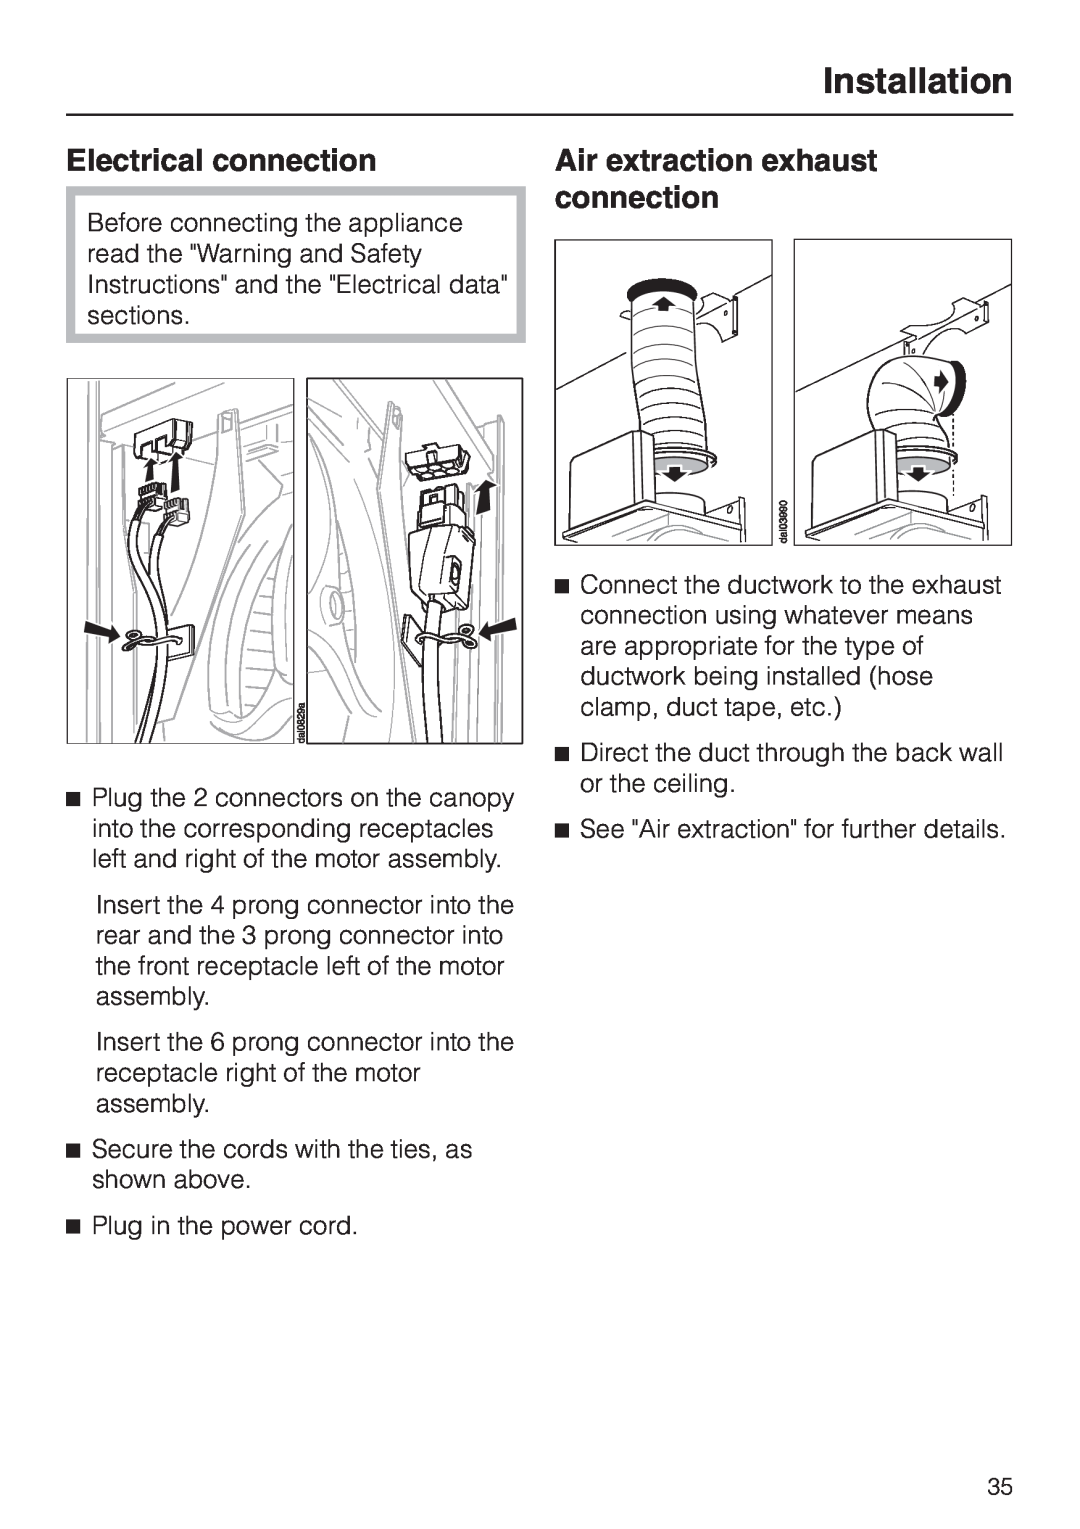 Miele DA211, DA218 installation instructions Electrical connection, Air extraction exhaust connection, Installation 